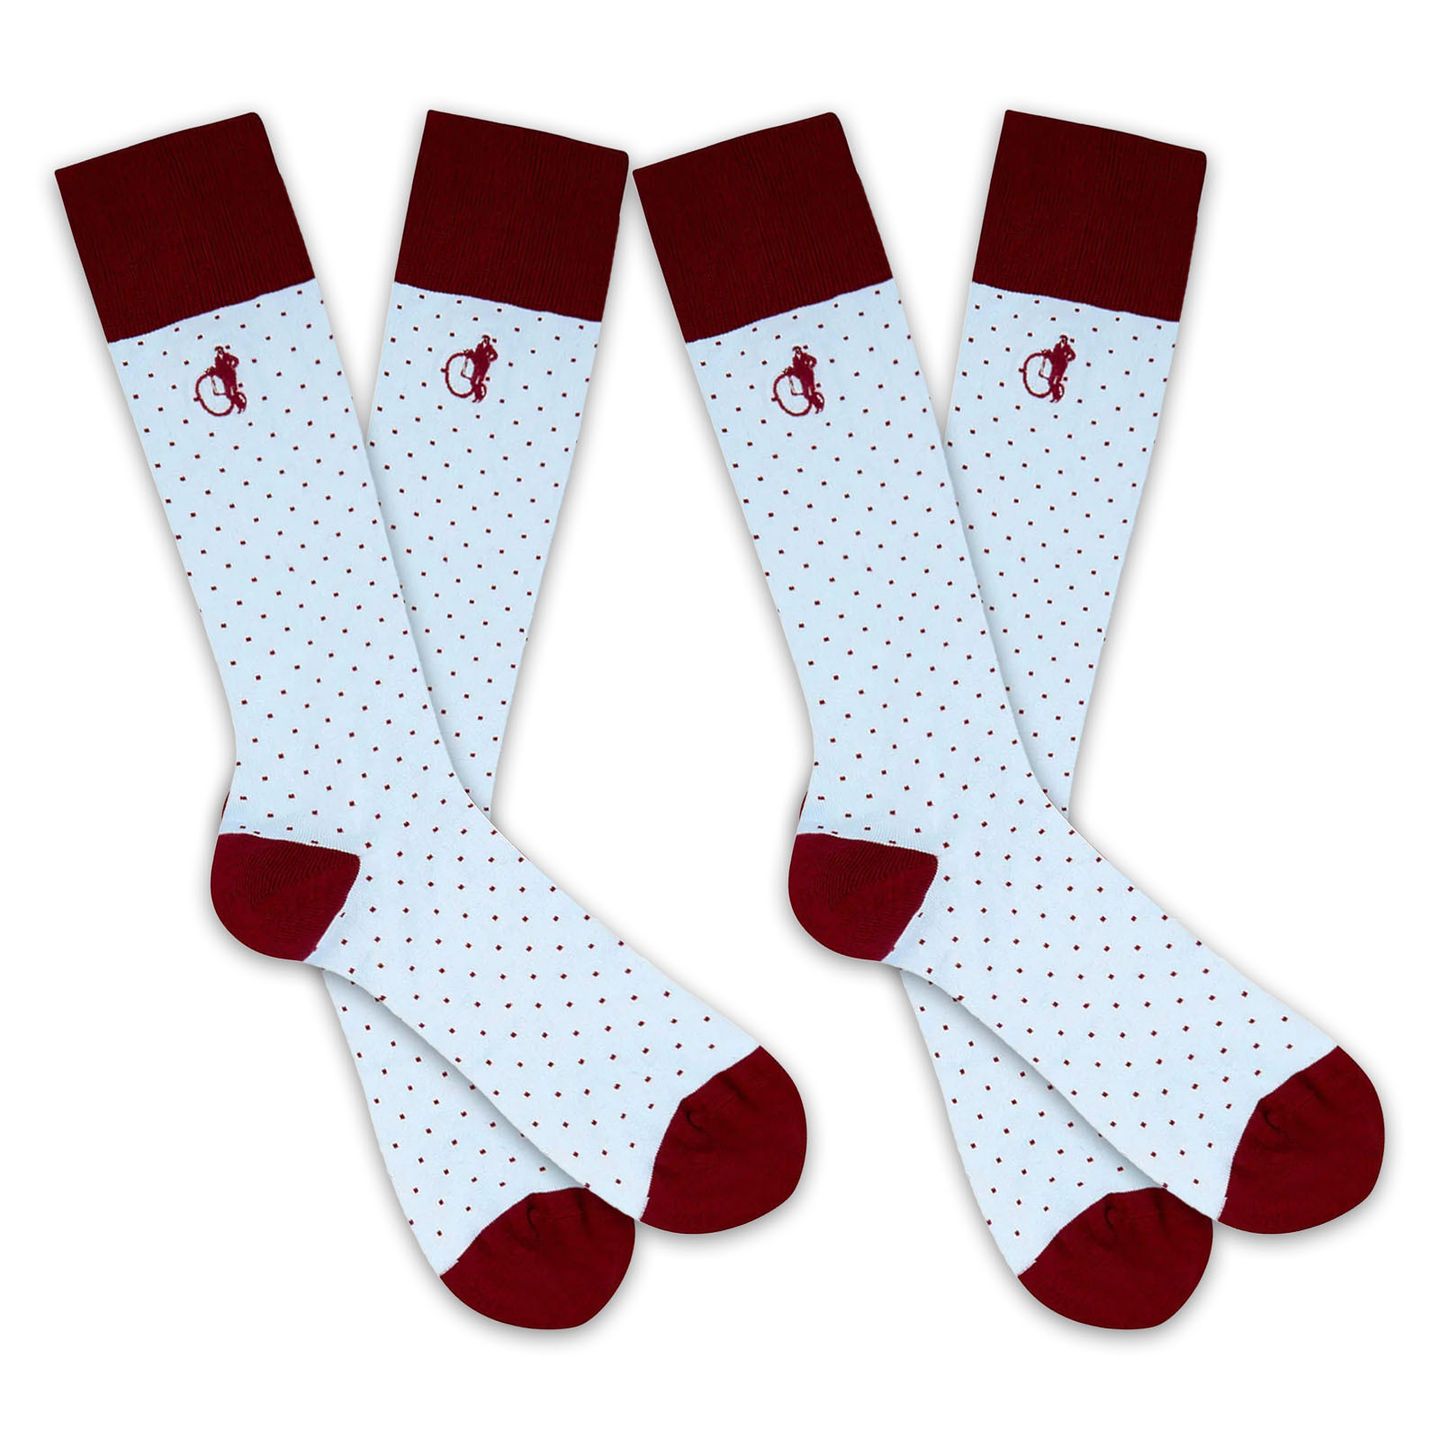 2 pairs of light blue socks with a burgundy polka dot pattern